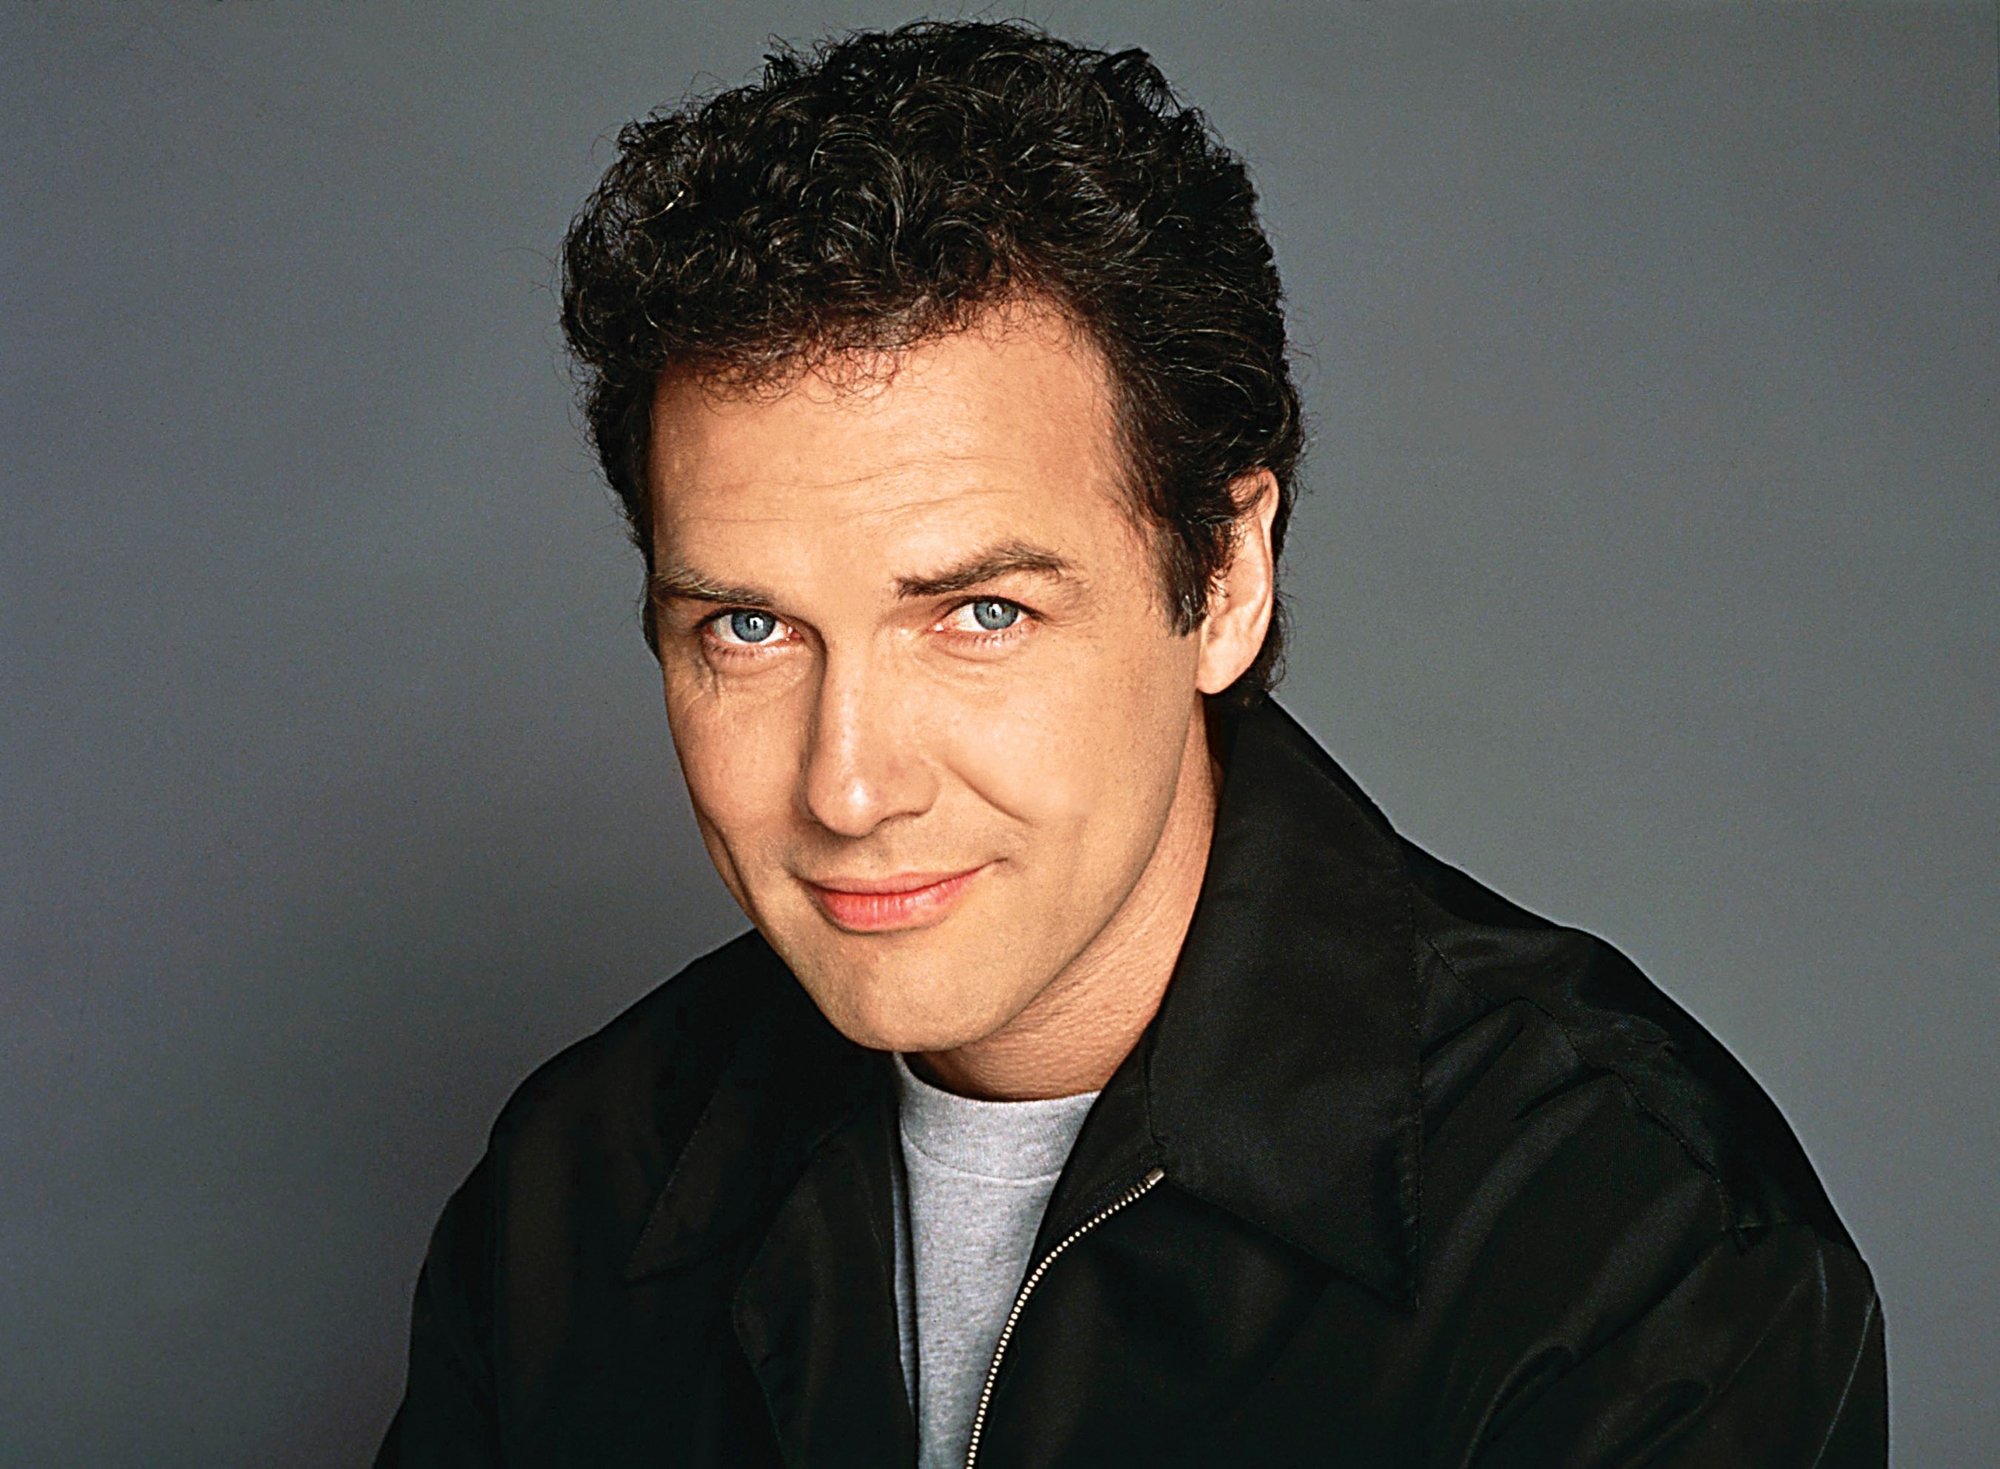 'Saturday Night Live' Norm Macdonald with a closed-mouth smile. He's wearing zip-up jacket and a grey crewneck shirt underneath.